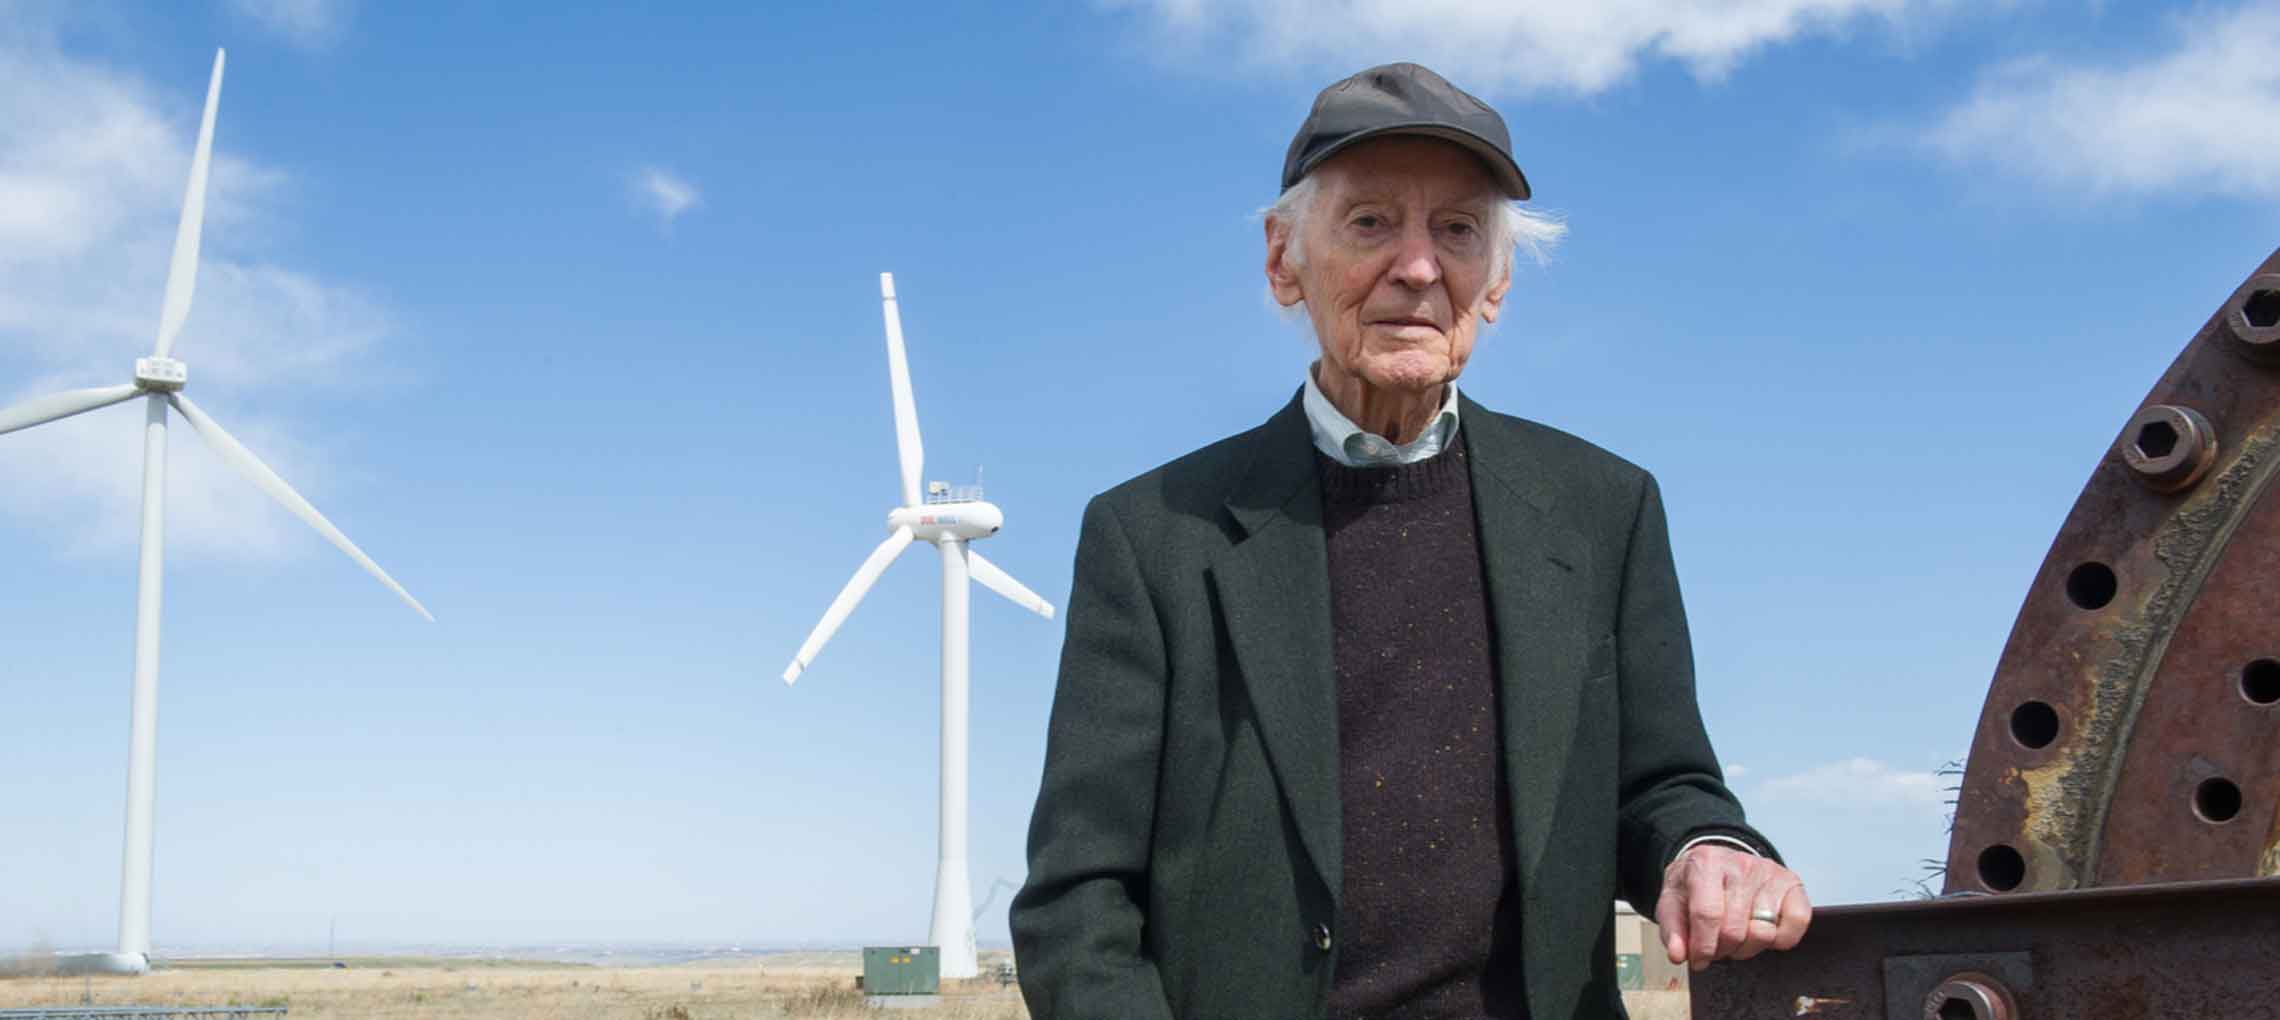 Photo of a man standing in front of megawatt-scale wind turbines.